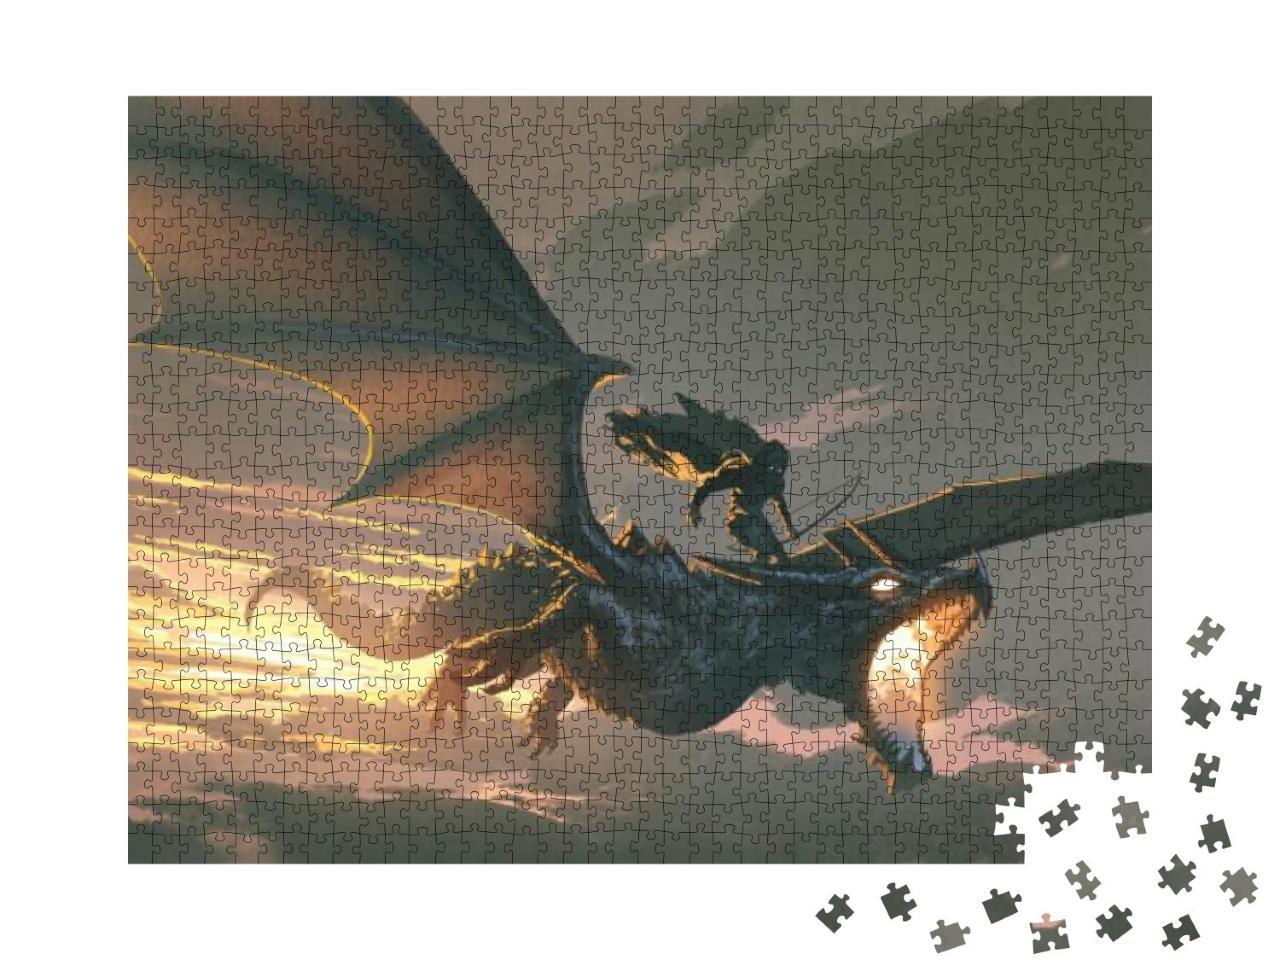 The Black Knight Riding the Dragon Flying in the Sunset S... Jigsaw Puzzle with 1000 pieces